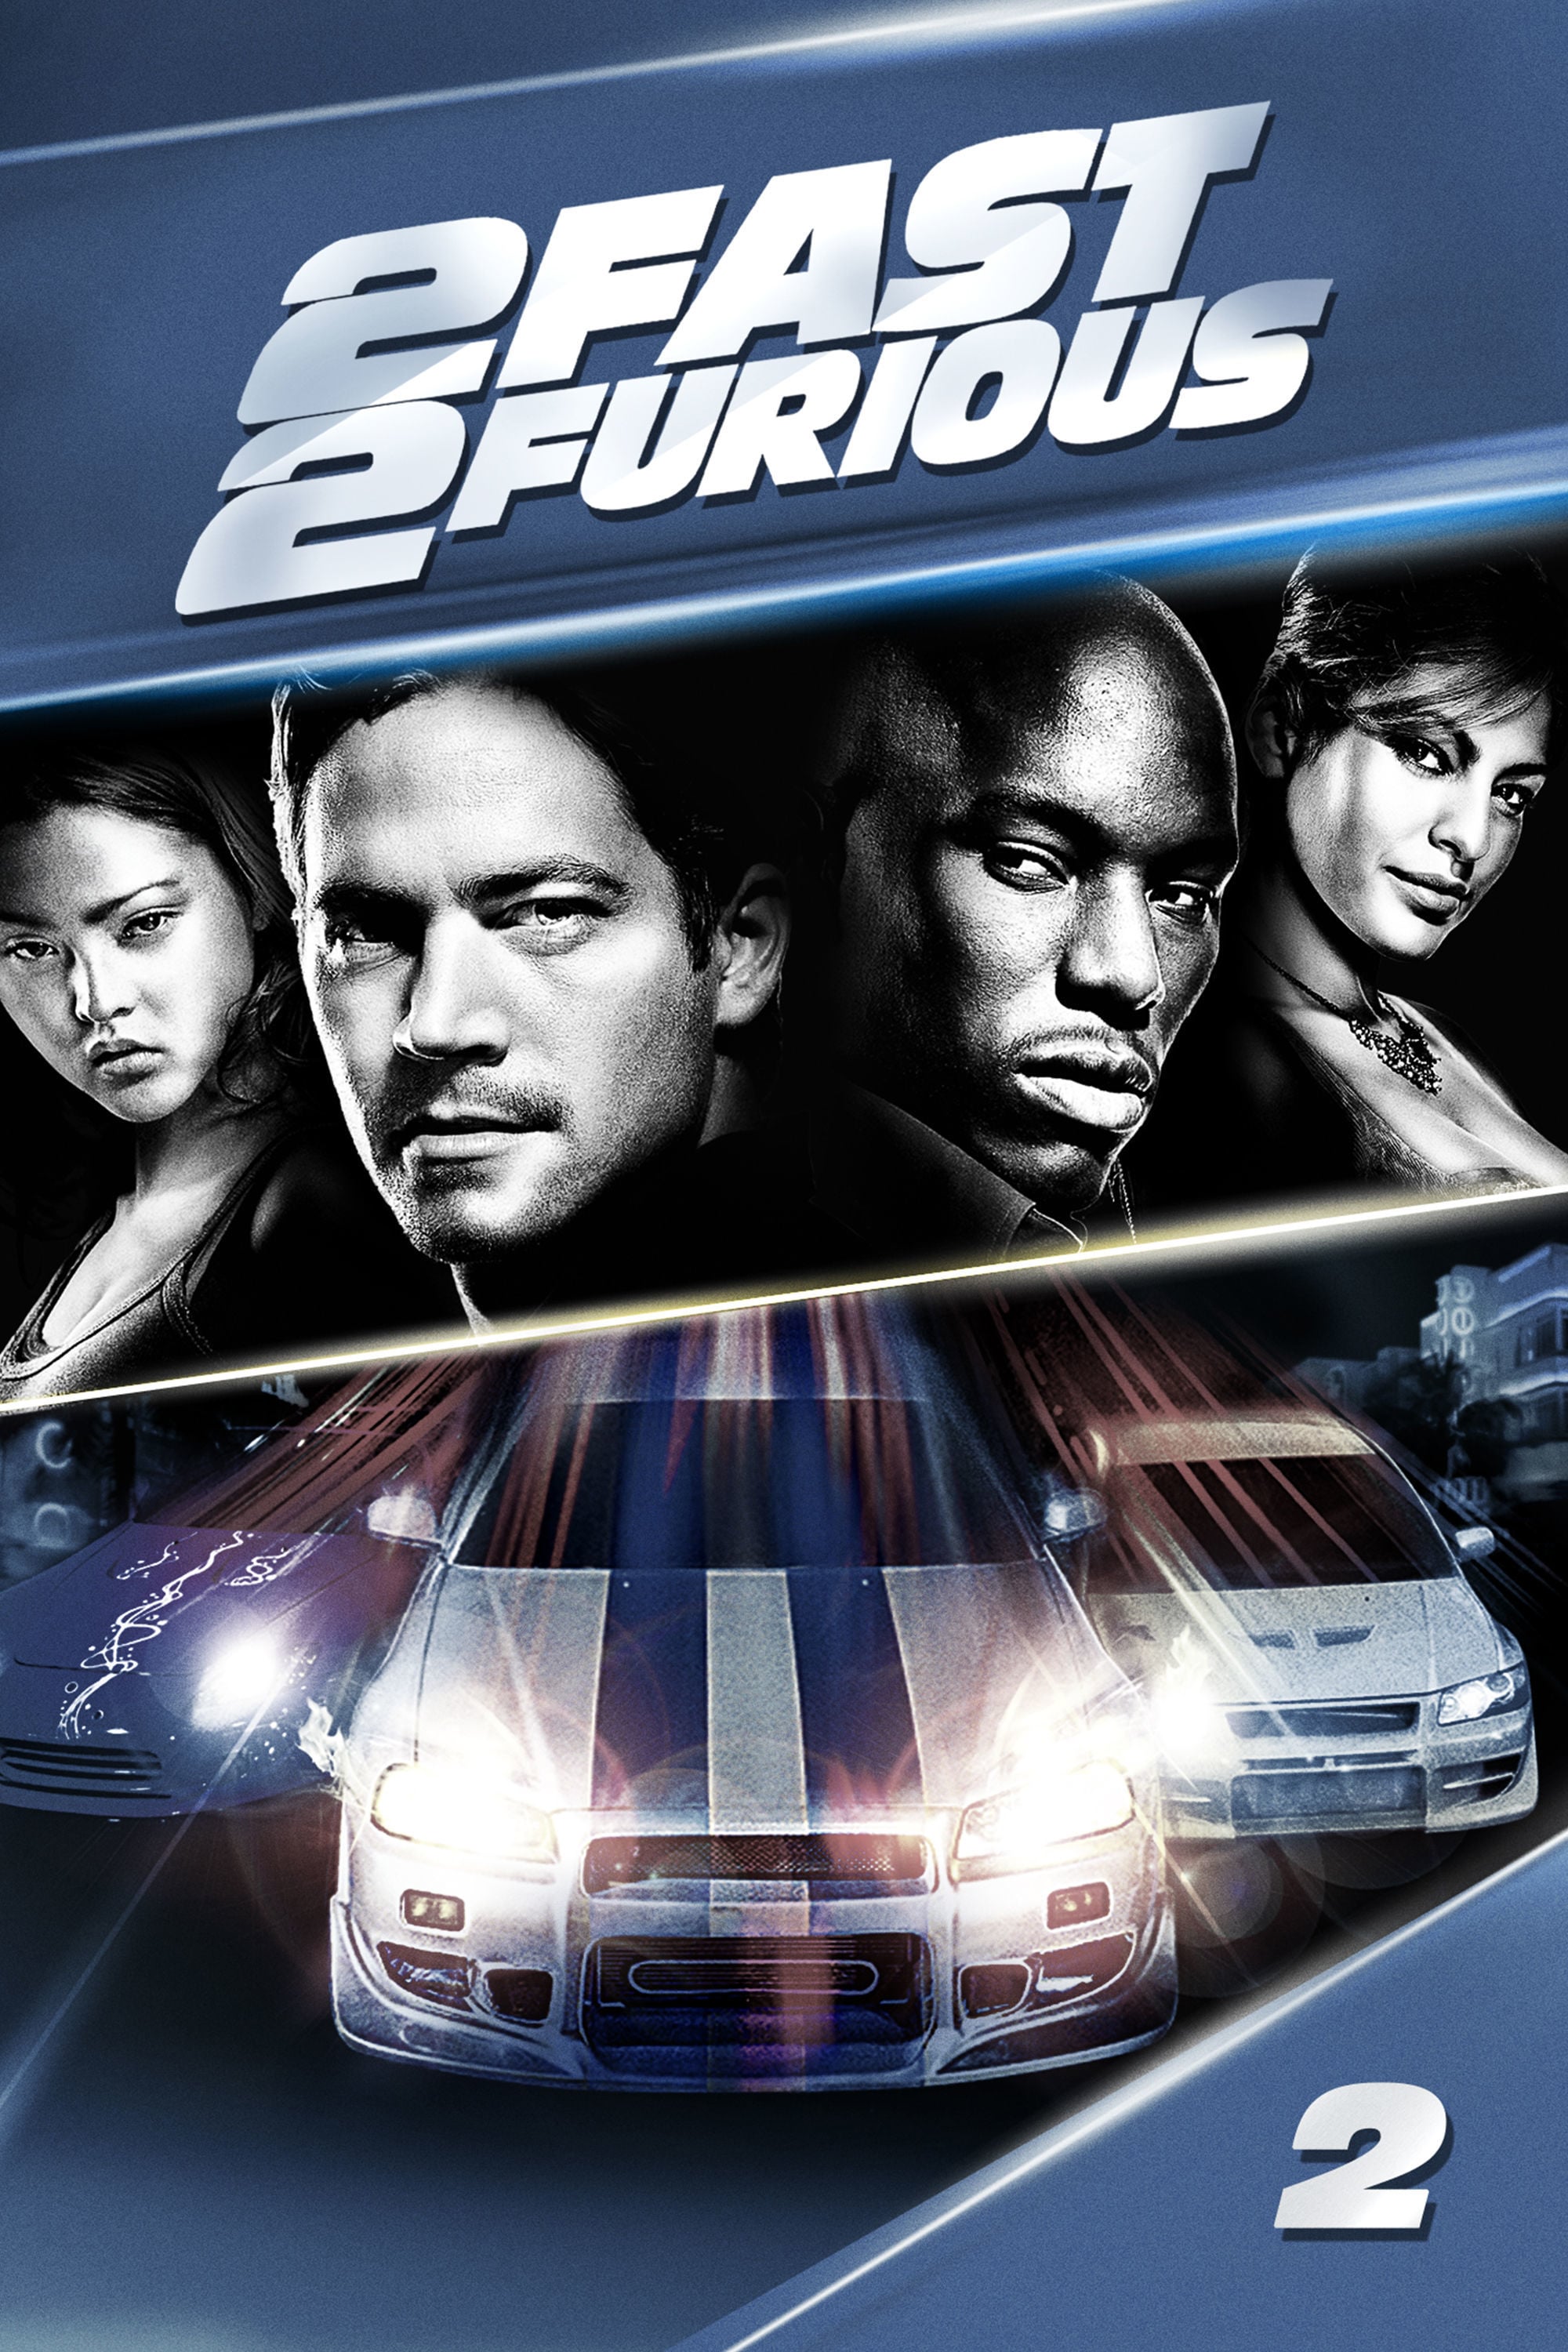 2Fast2Furious_Poster